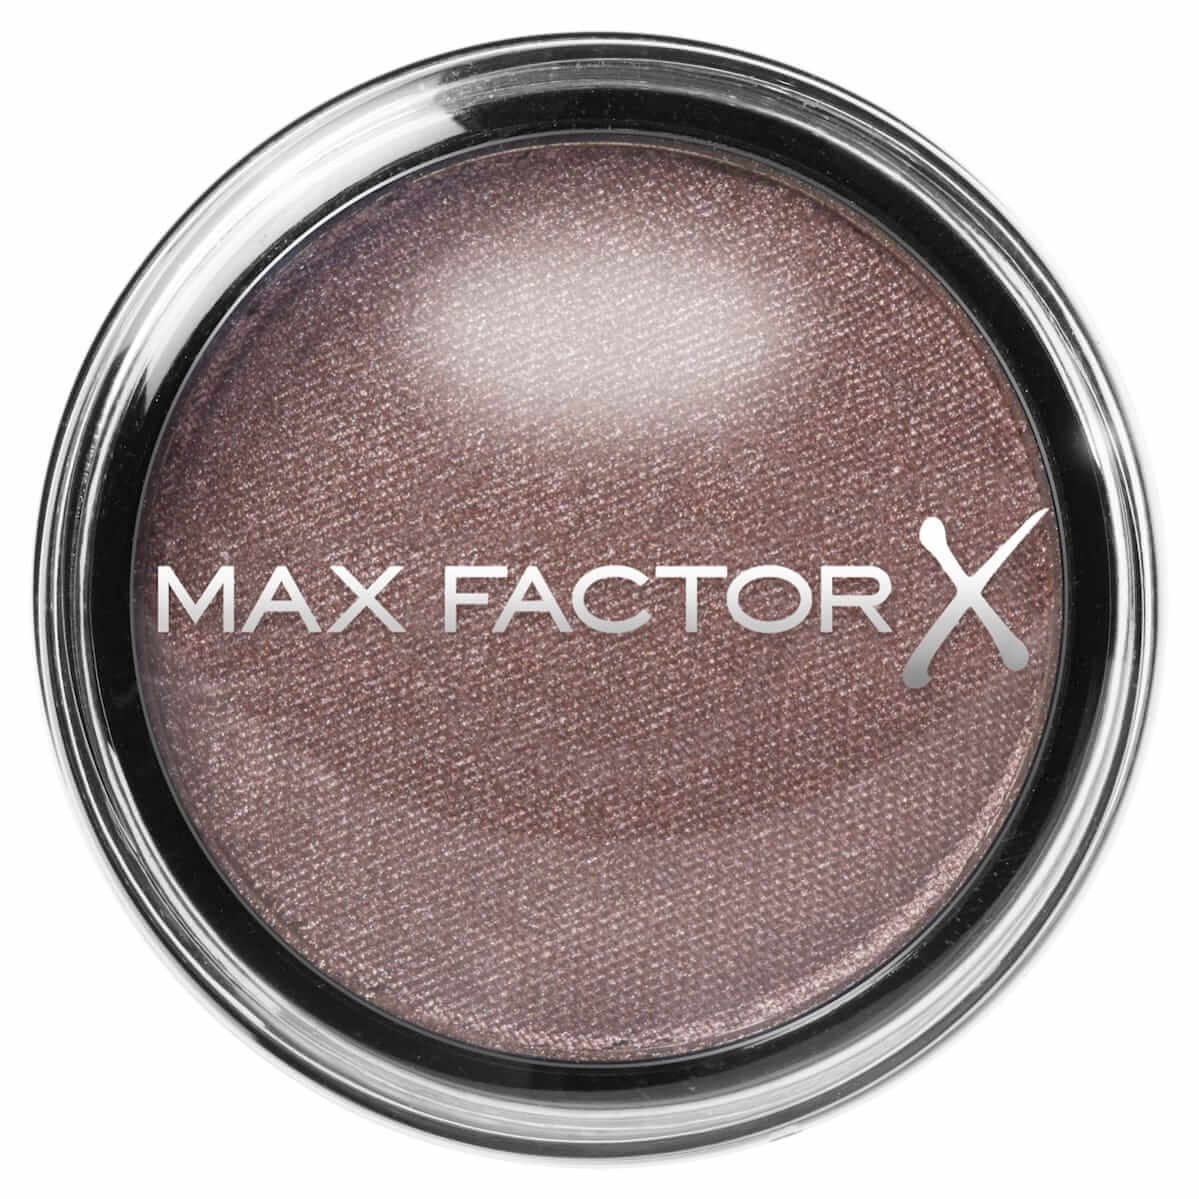 How to Apply Eyeshadow the Makeup Artist Way | Max Factor